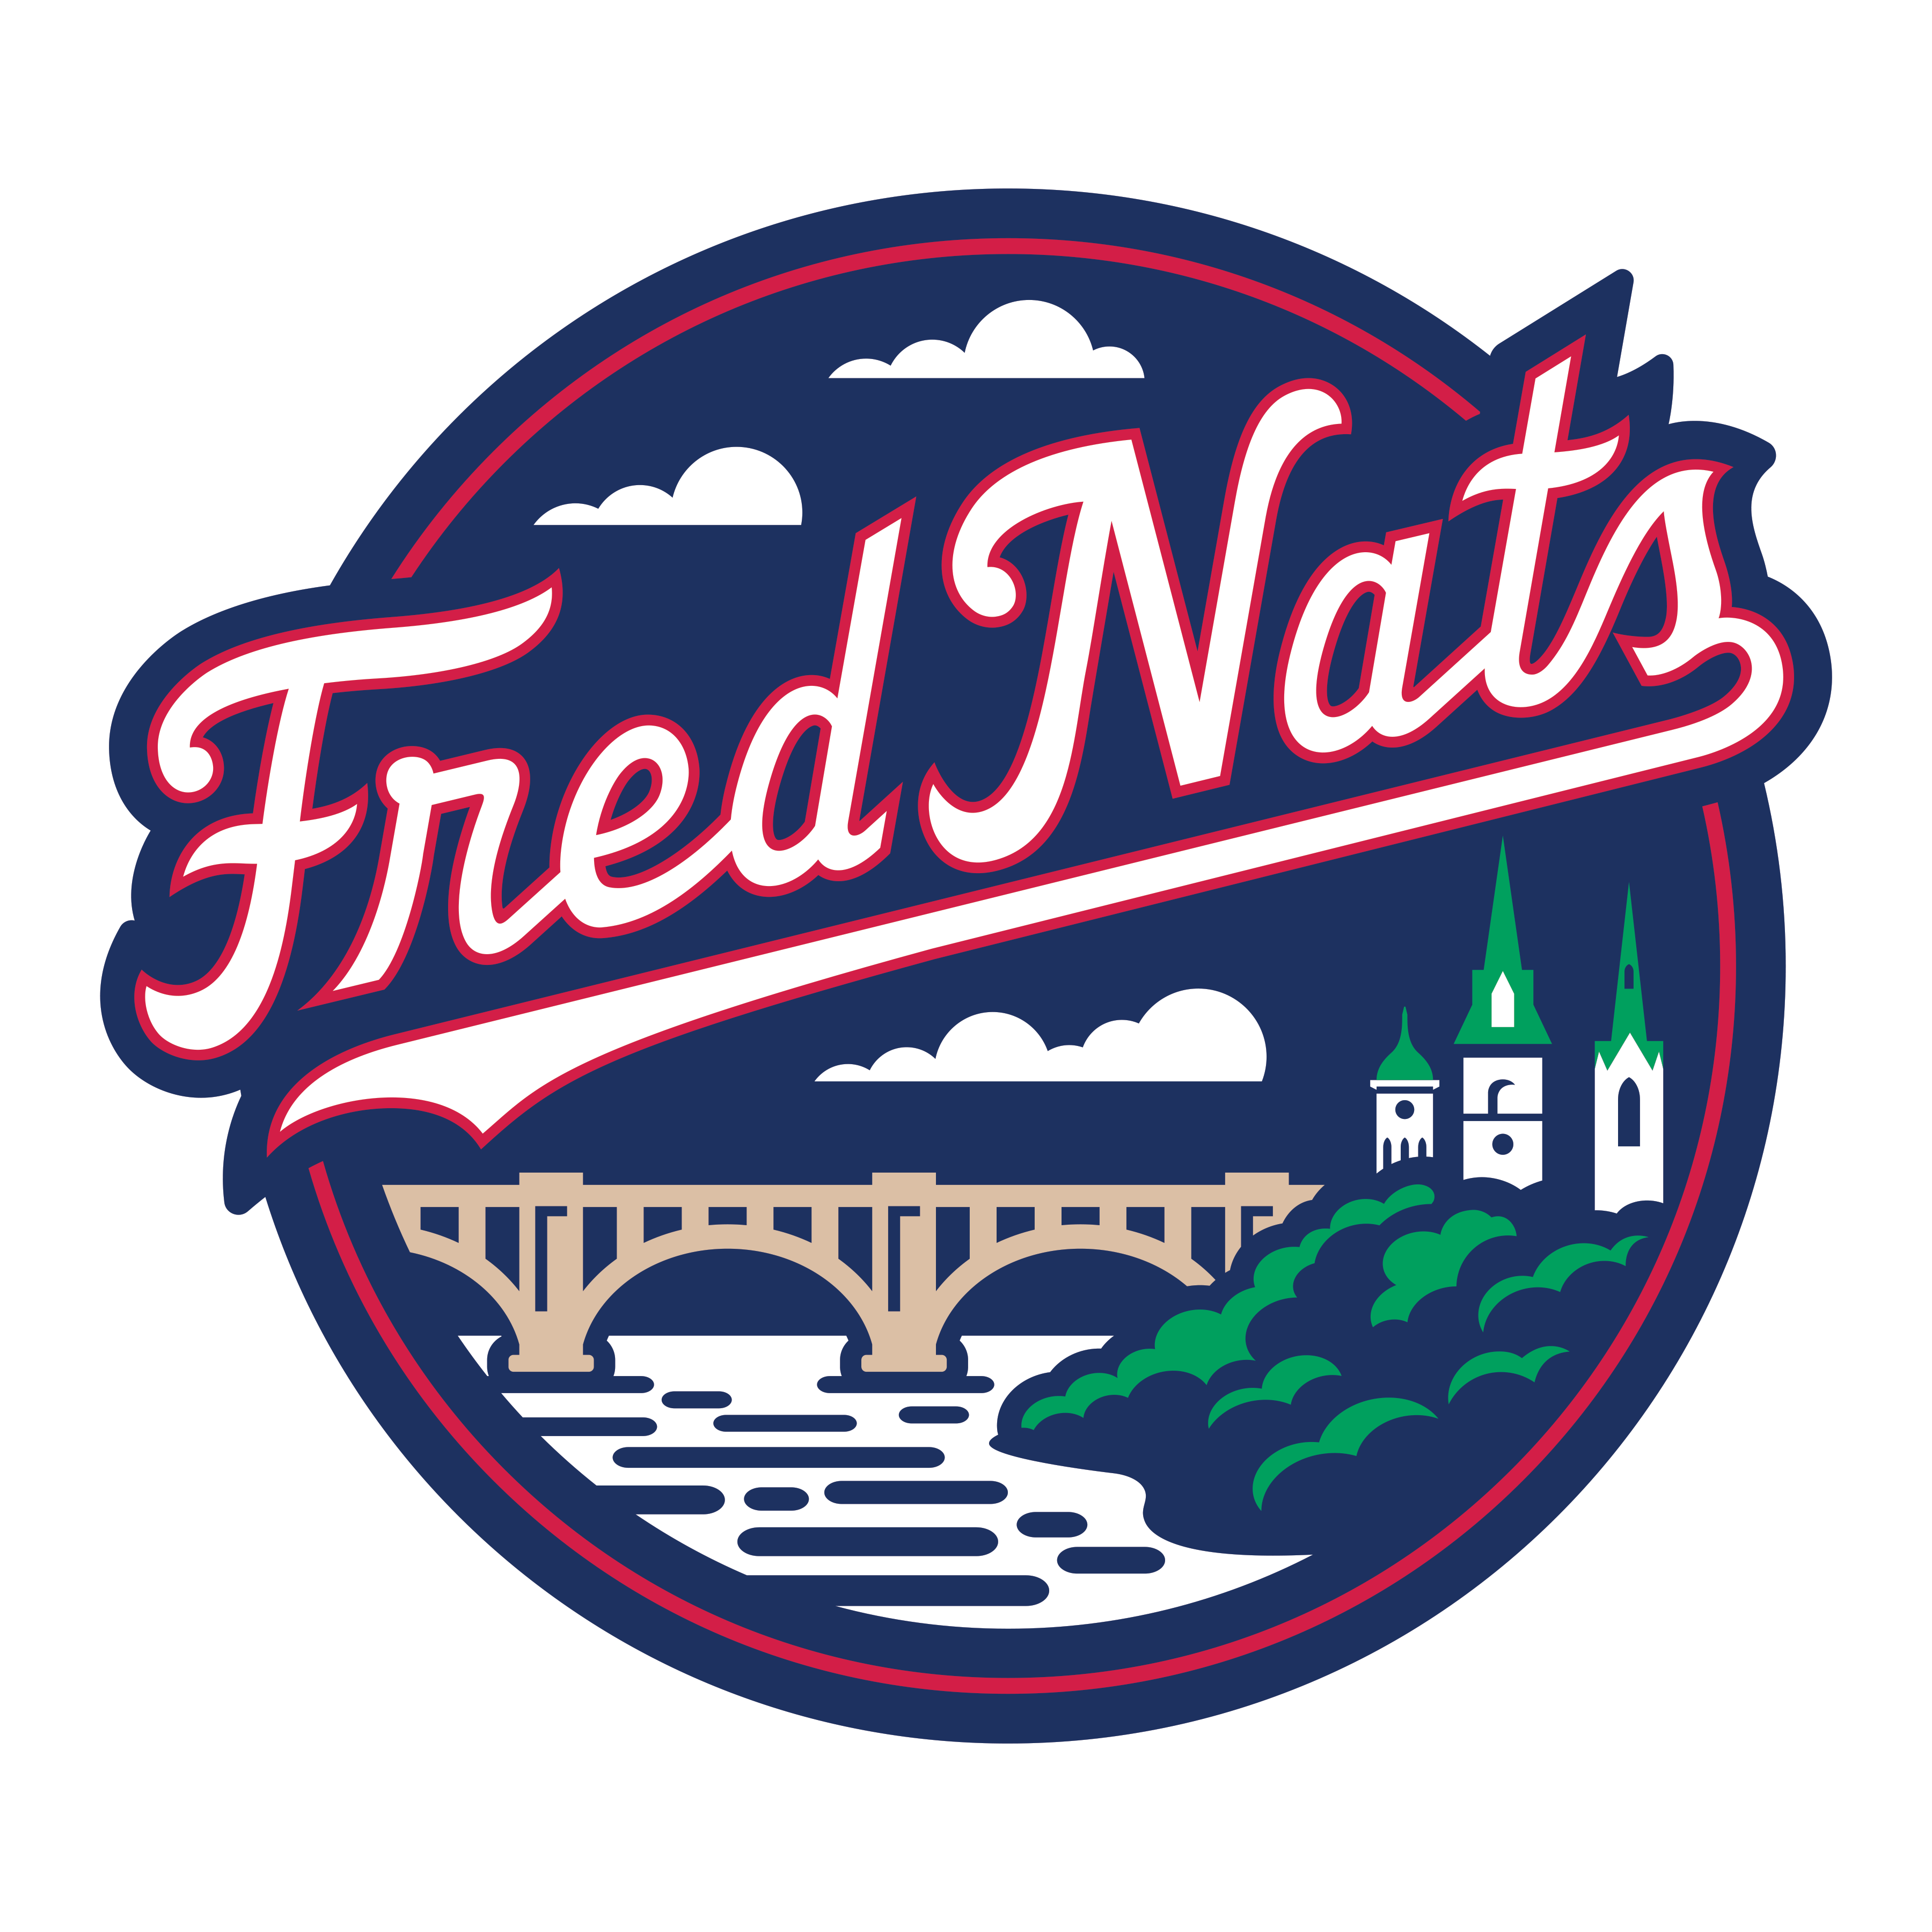 FredNats to announce partnership with Germanna